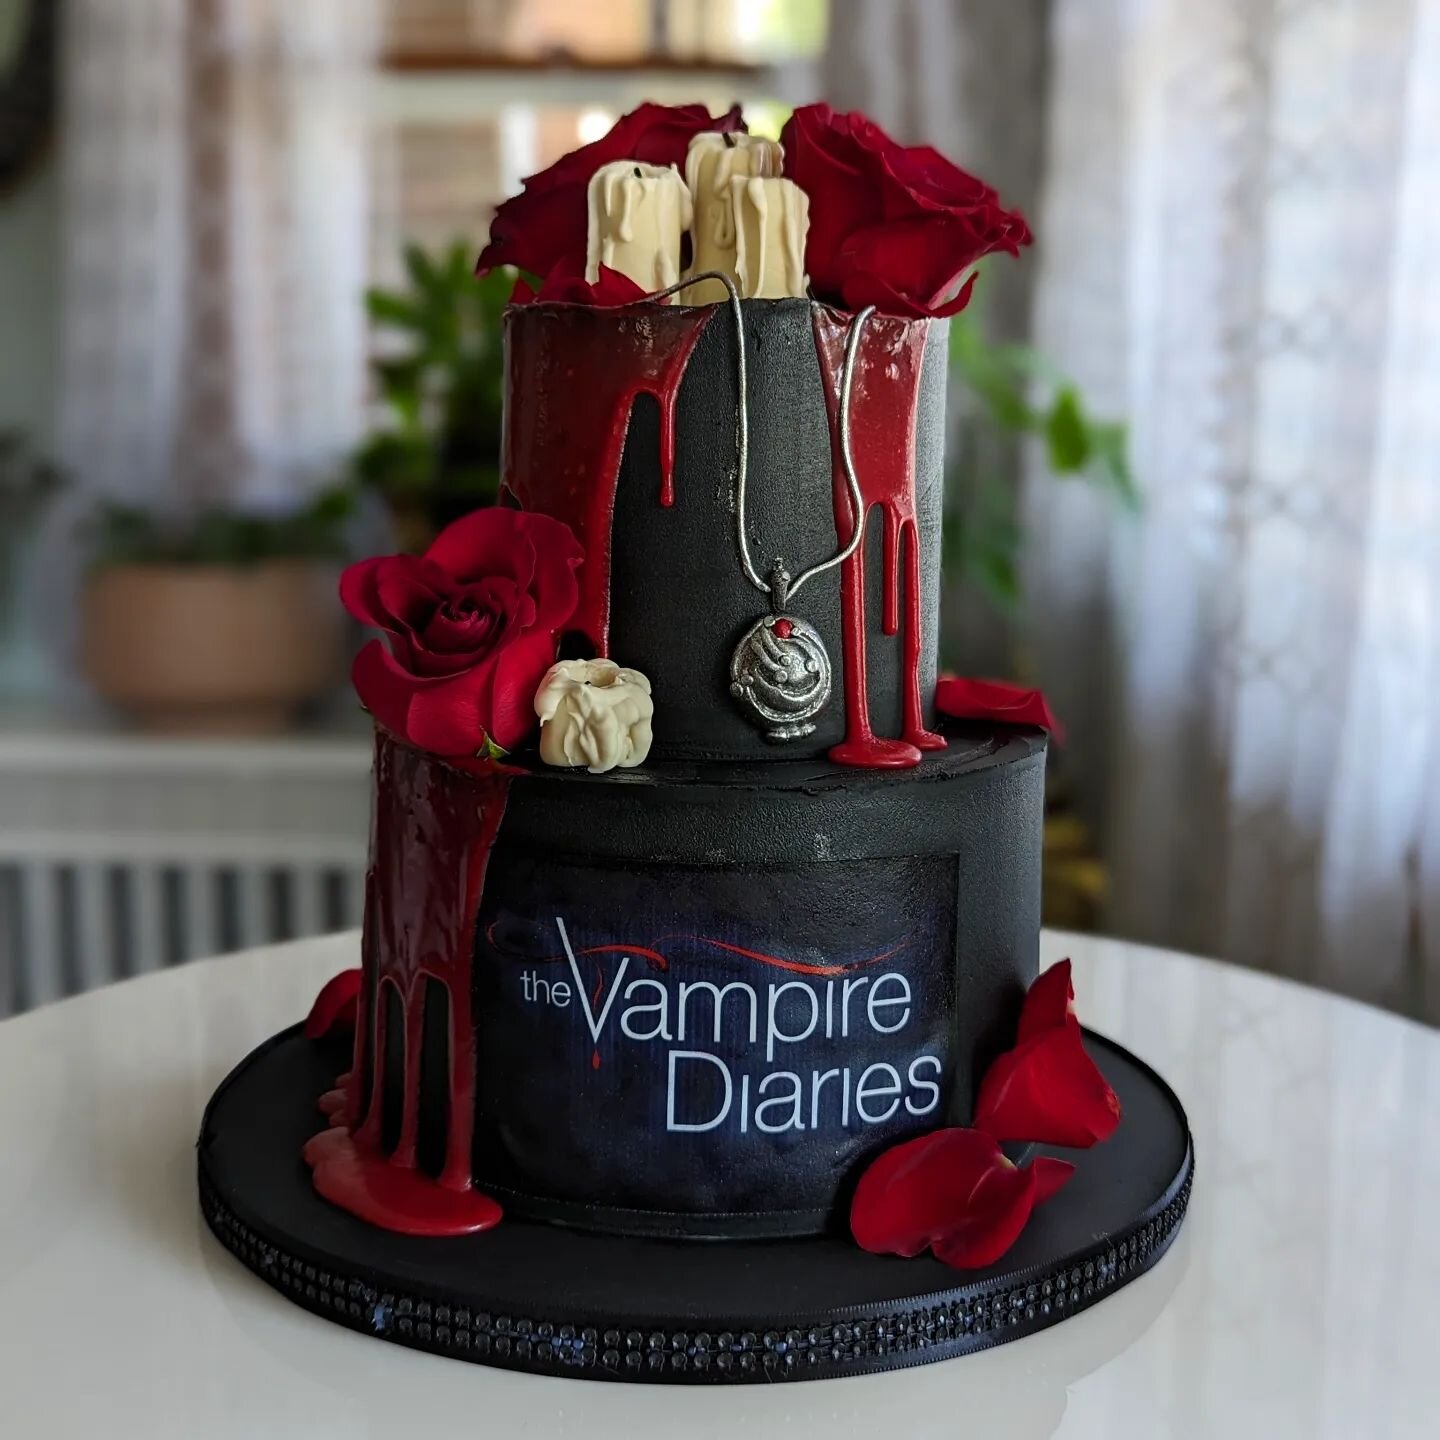 Vampire Diaries theme for this birthday cake 🖤

Candles for BonBon, Elena's vervain necklace, roses for whichever Salvatore brother you prefer 🤣, and an excessive amount of red drip to represent ALL of the, well, vampires ❤️

Flavor : Classic Vanil